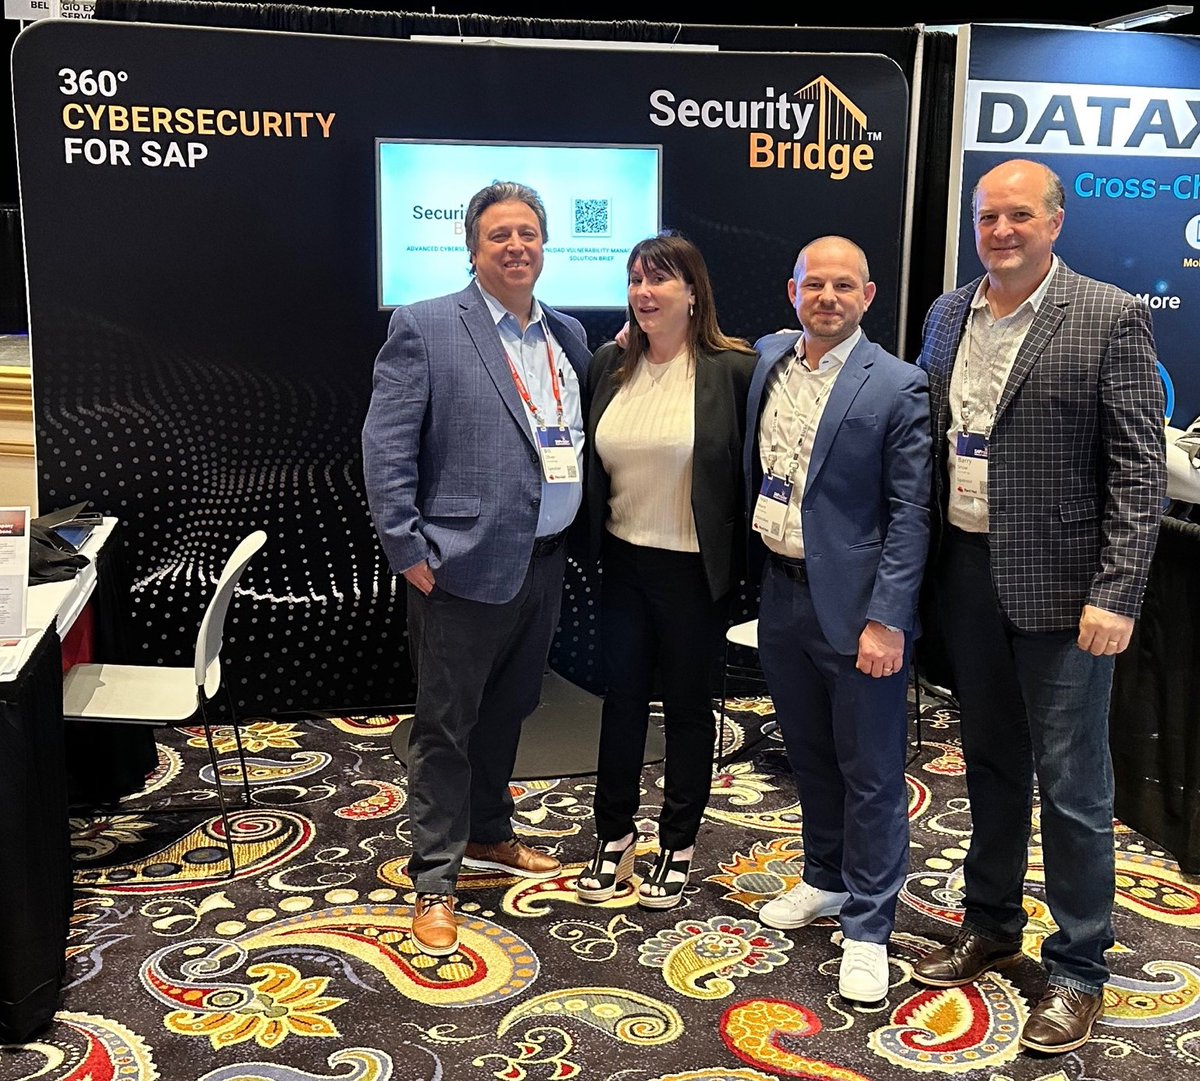 What an unmissable event! 🚀 

We're having an amazing time at SAPinsider 2023, our team is excited to continue engaging with you and is ready to answer any questions you may have.

Don’t hesitate to drop by and say hello at our booth 2325! 👋

#SAPinsider2023 #SecurityBridge